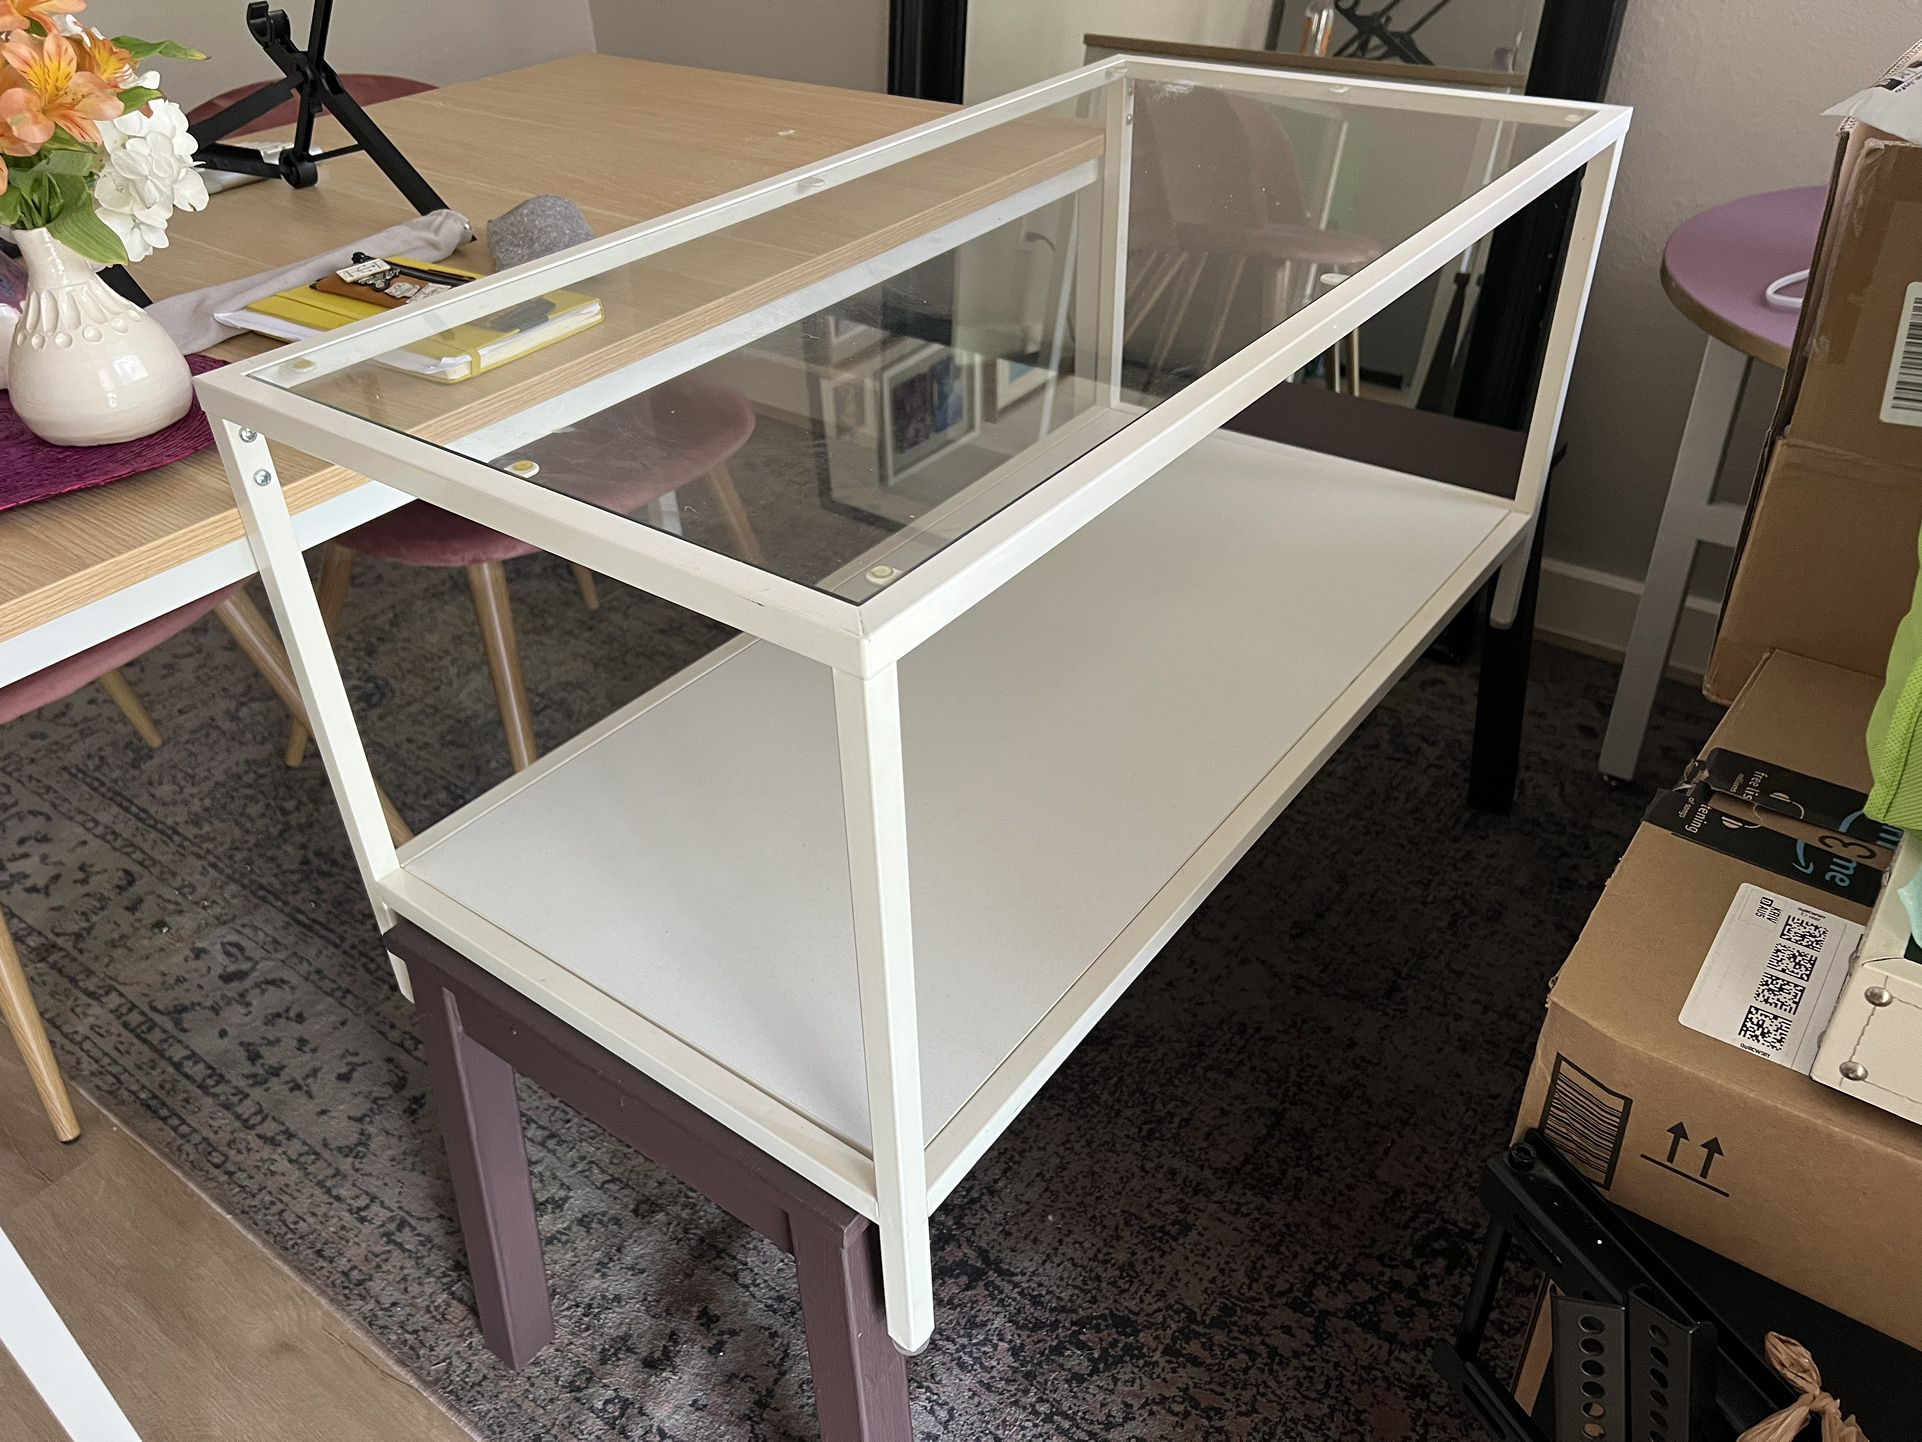 IKEA White and Glass Coffee Table 